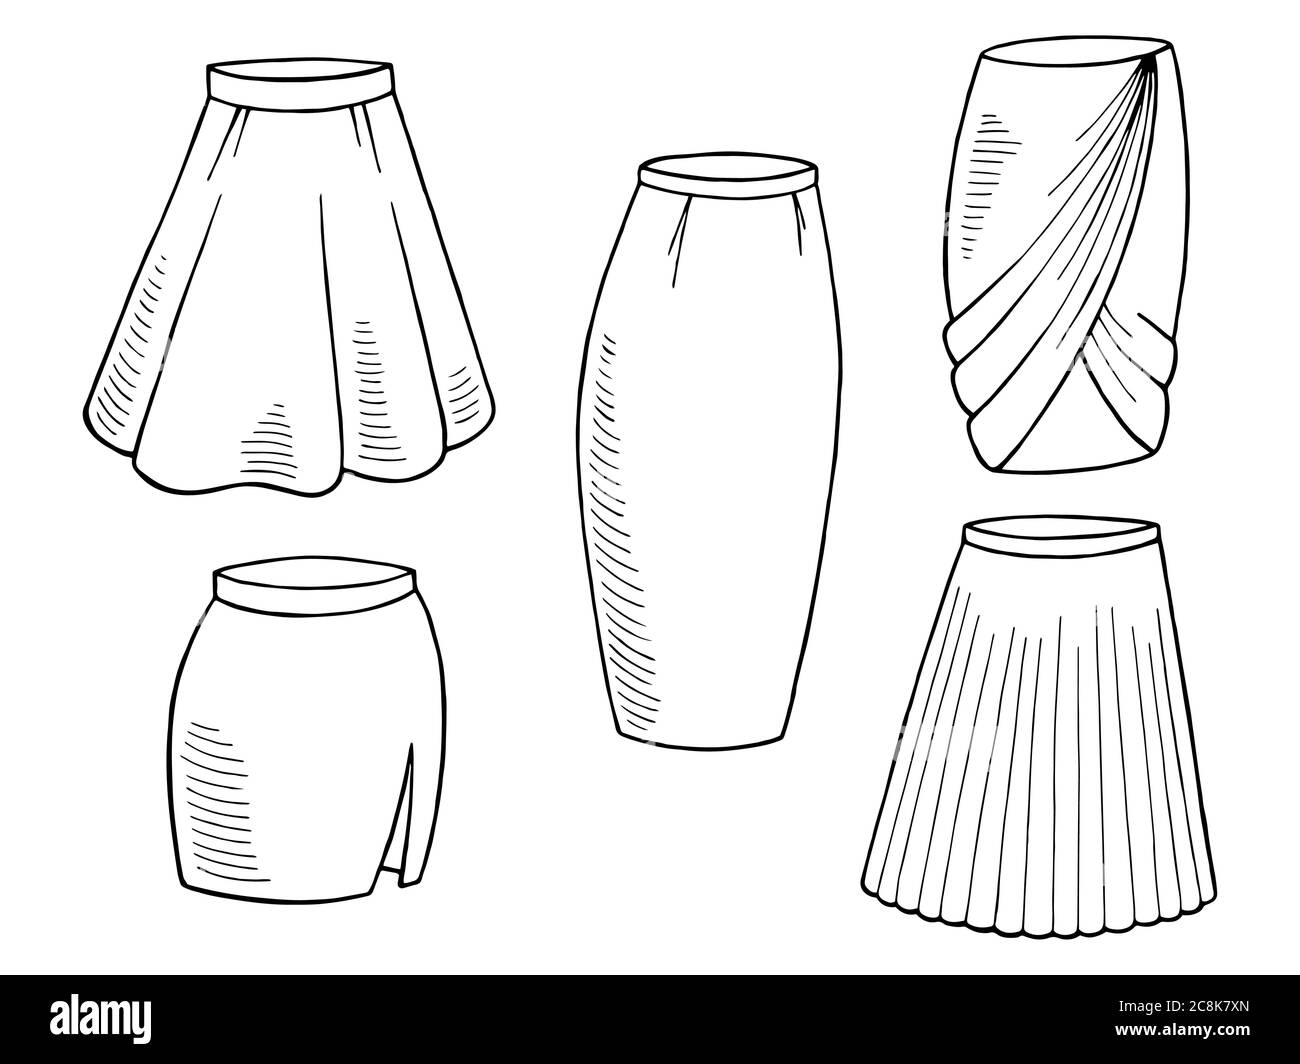 Buy Skirt Flat Technical Drawing Illustration Online in India  Etsy